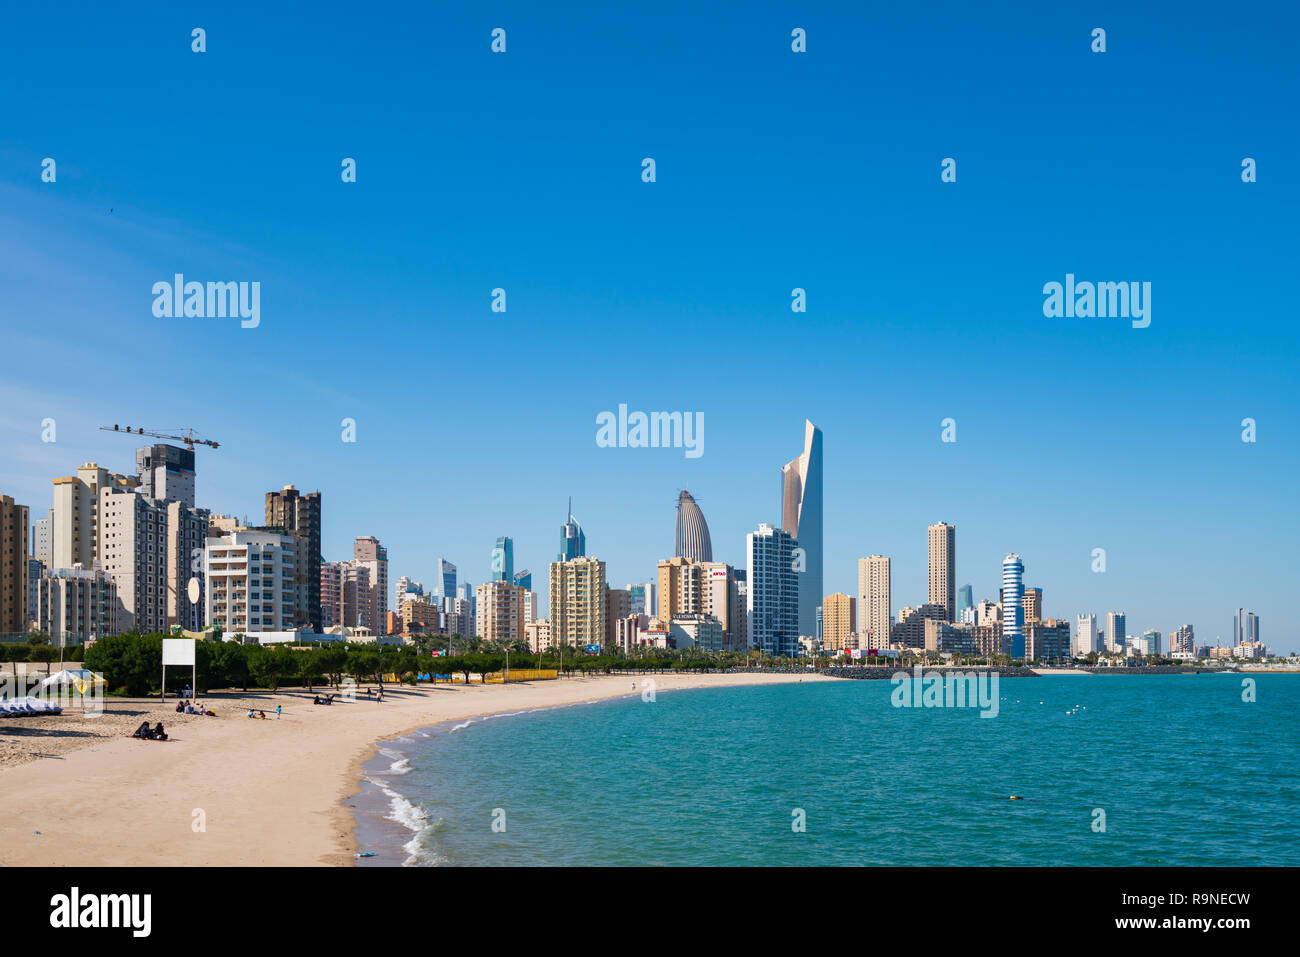 Daytime skyline of downtown Kuwait City in Kuwait, Middle East Stock Photo